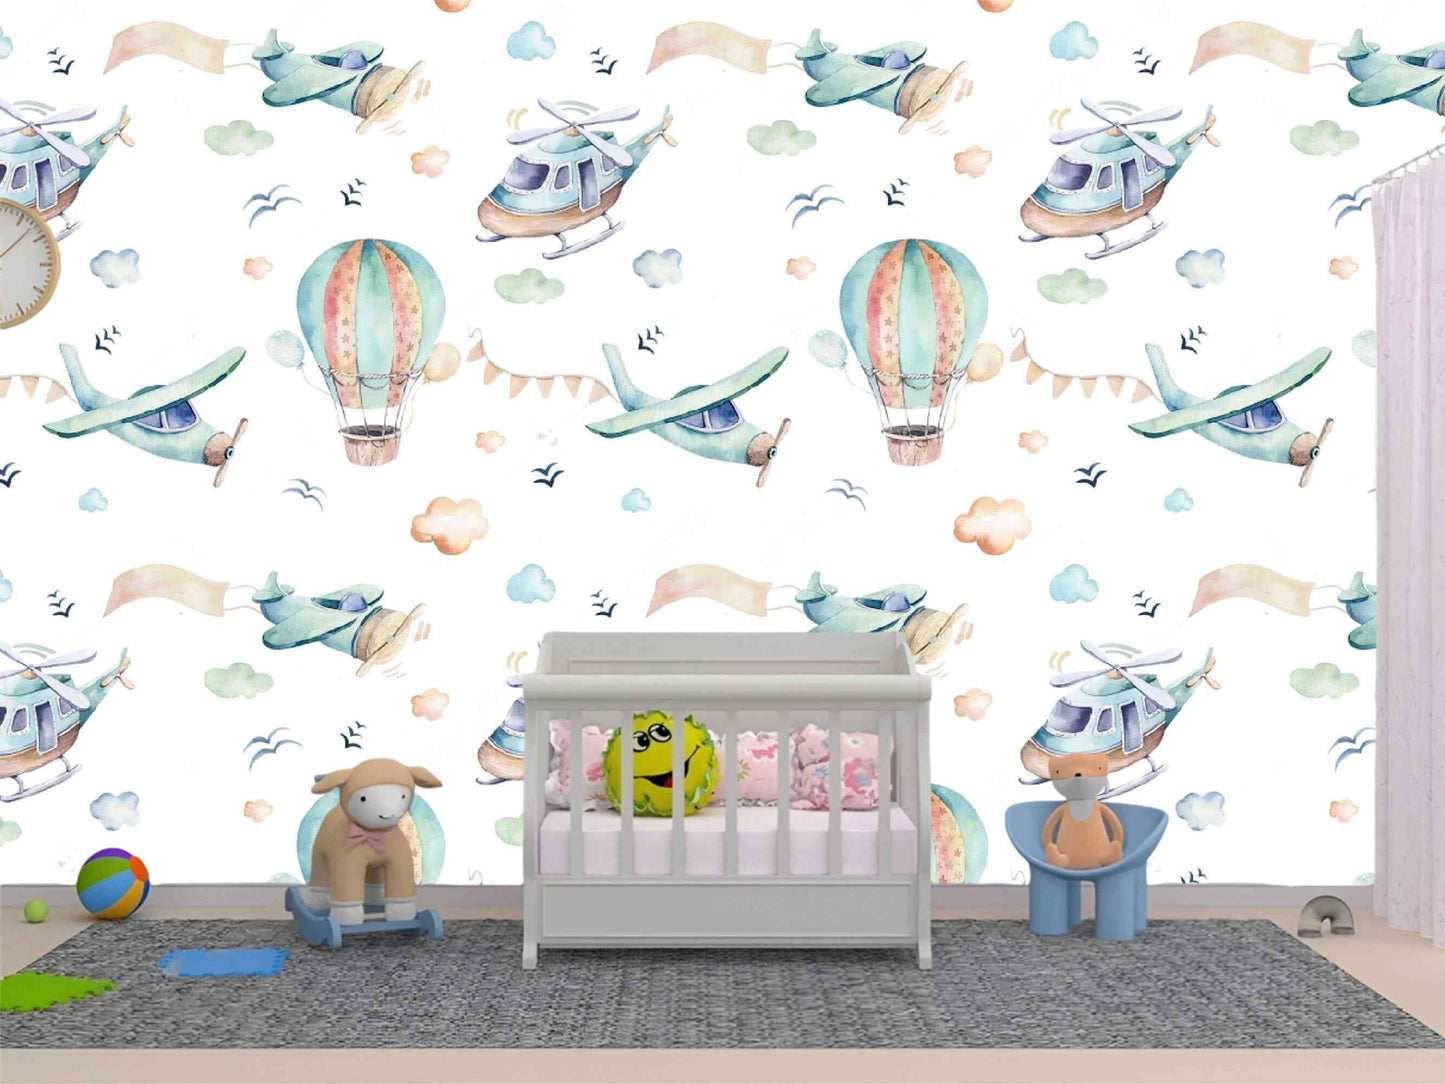 Whimsical Aviation-Themed Wallpaper for Baby Boy's Room